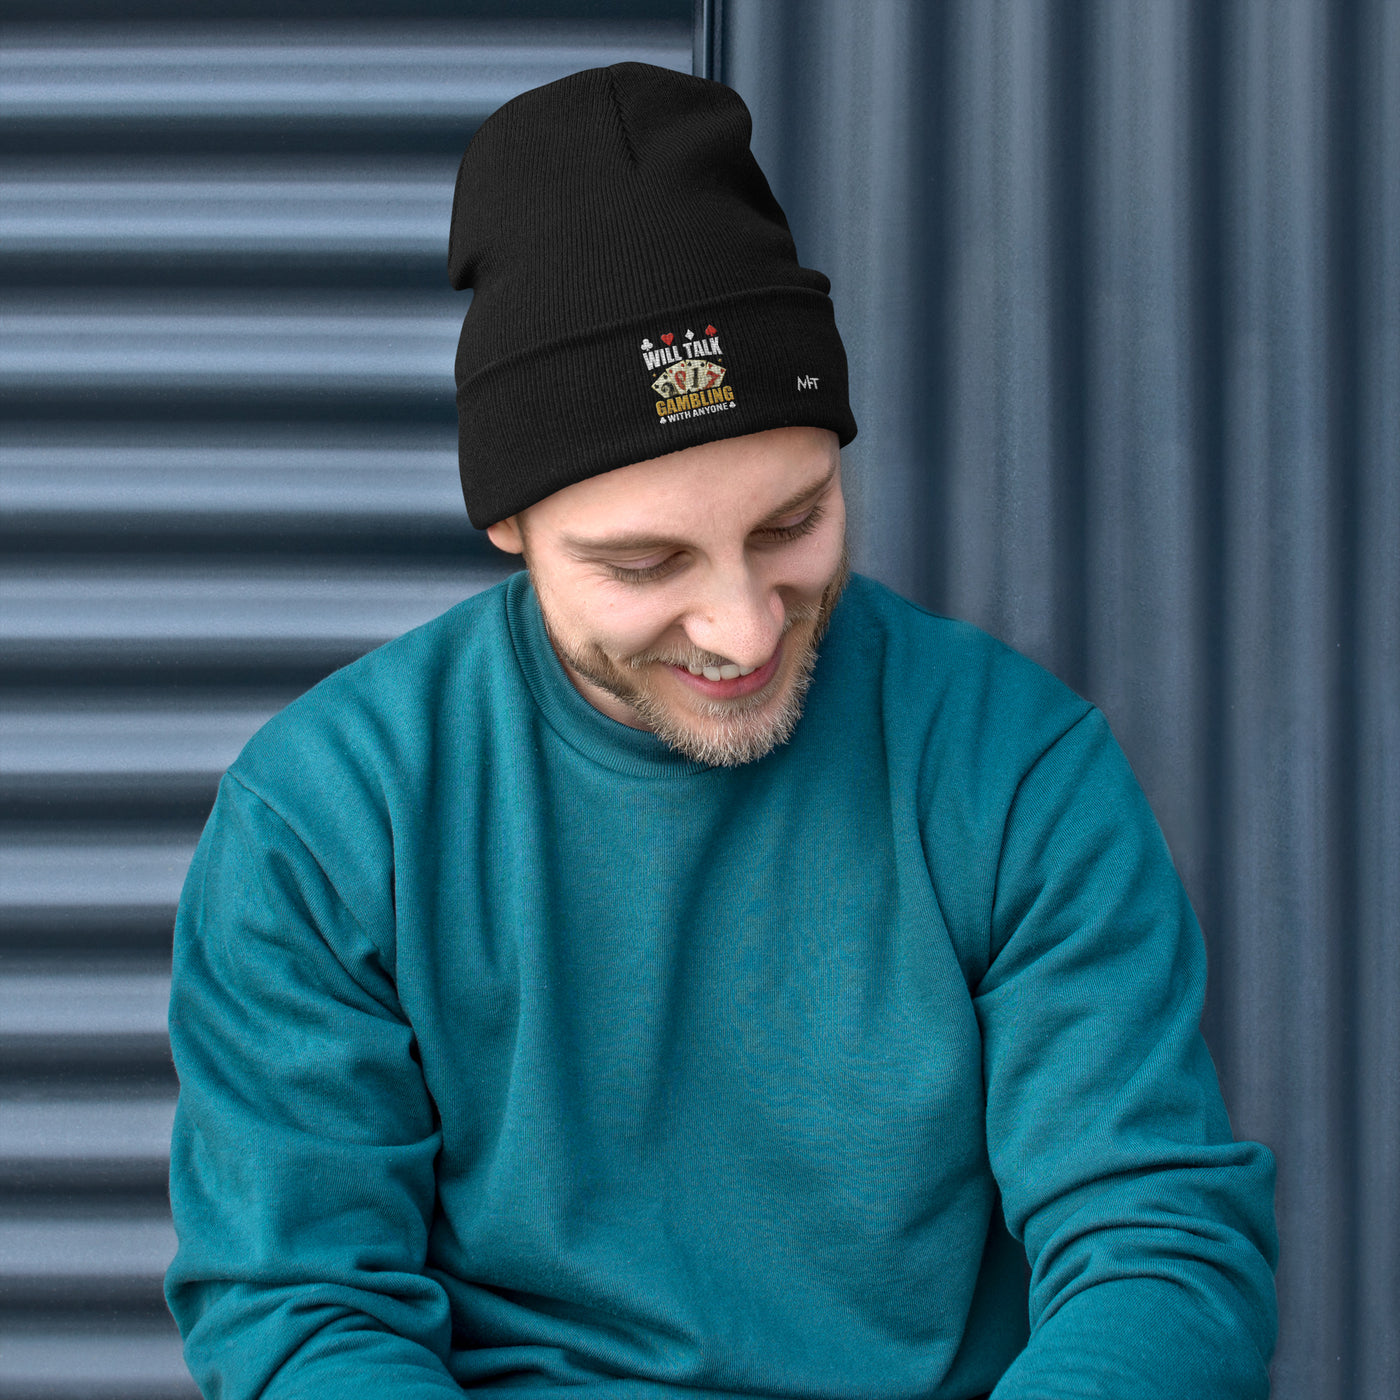 Will Talk about Gambling with everyone - Embroidered Beanie